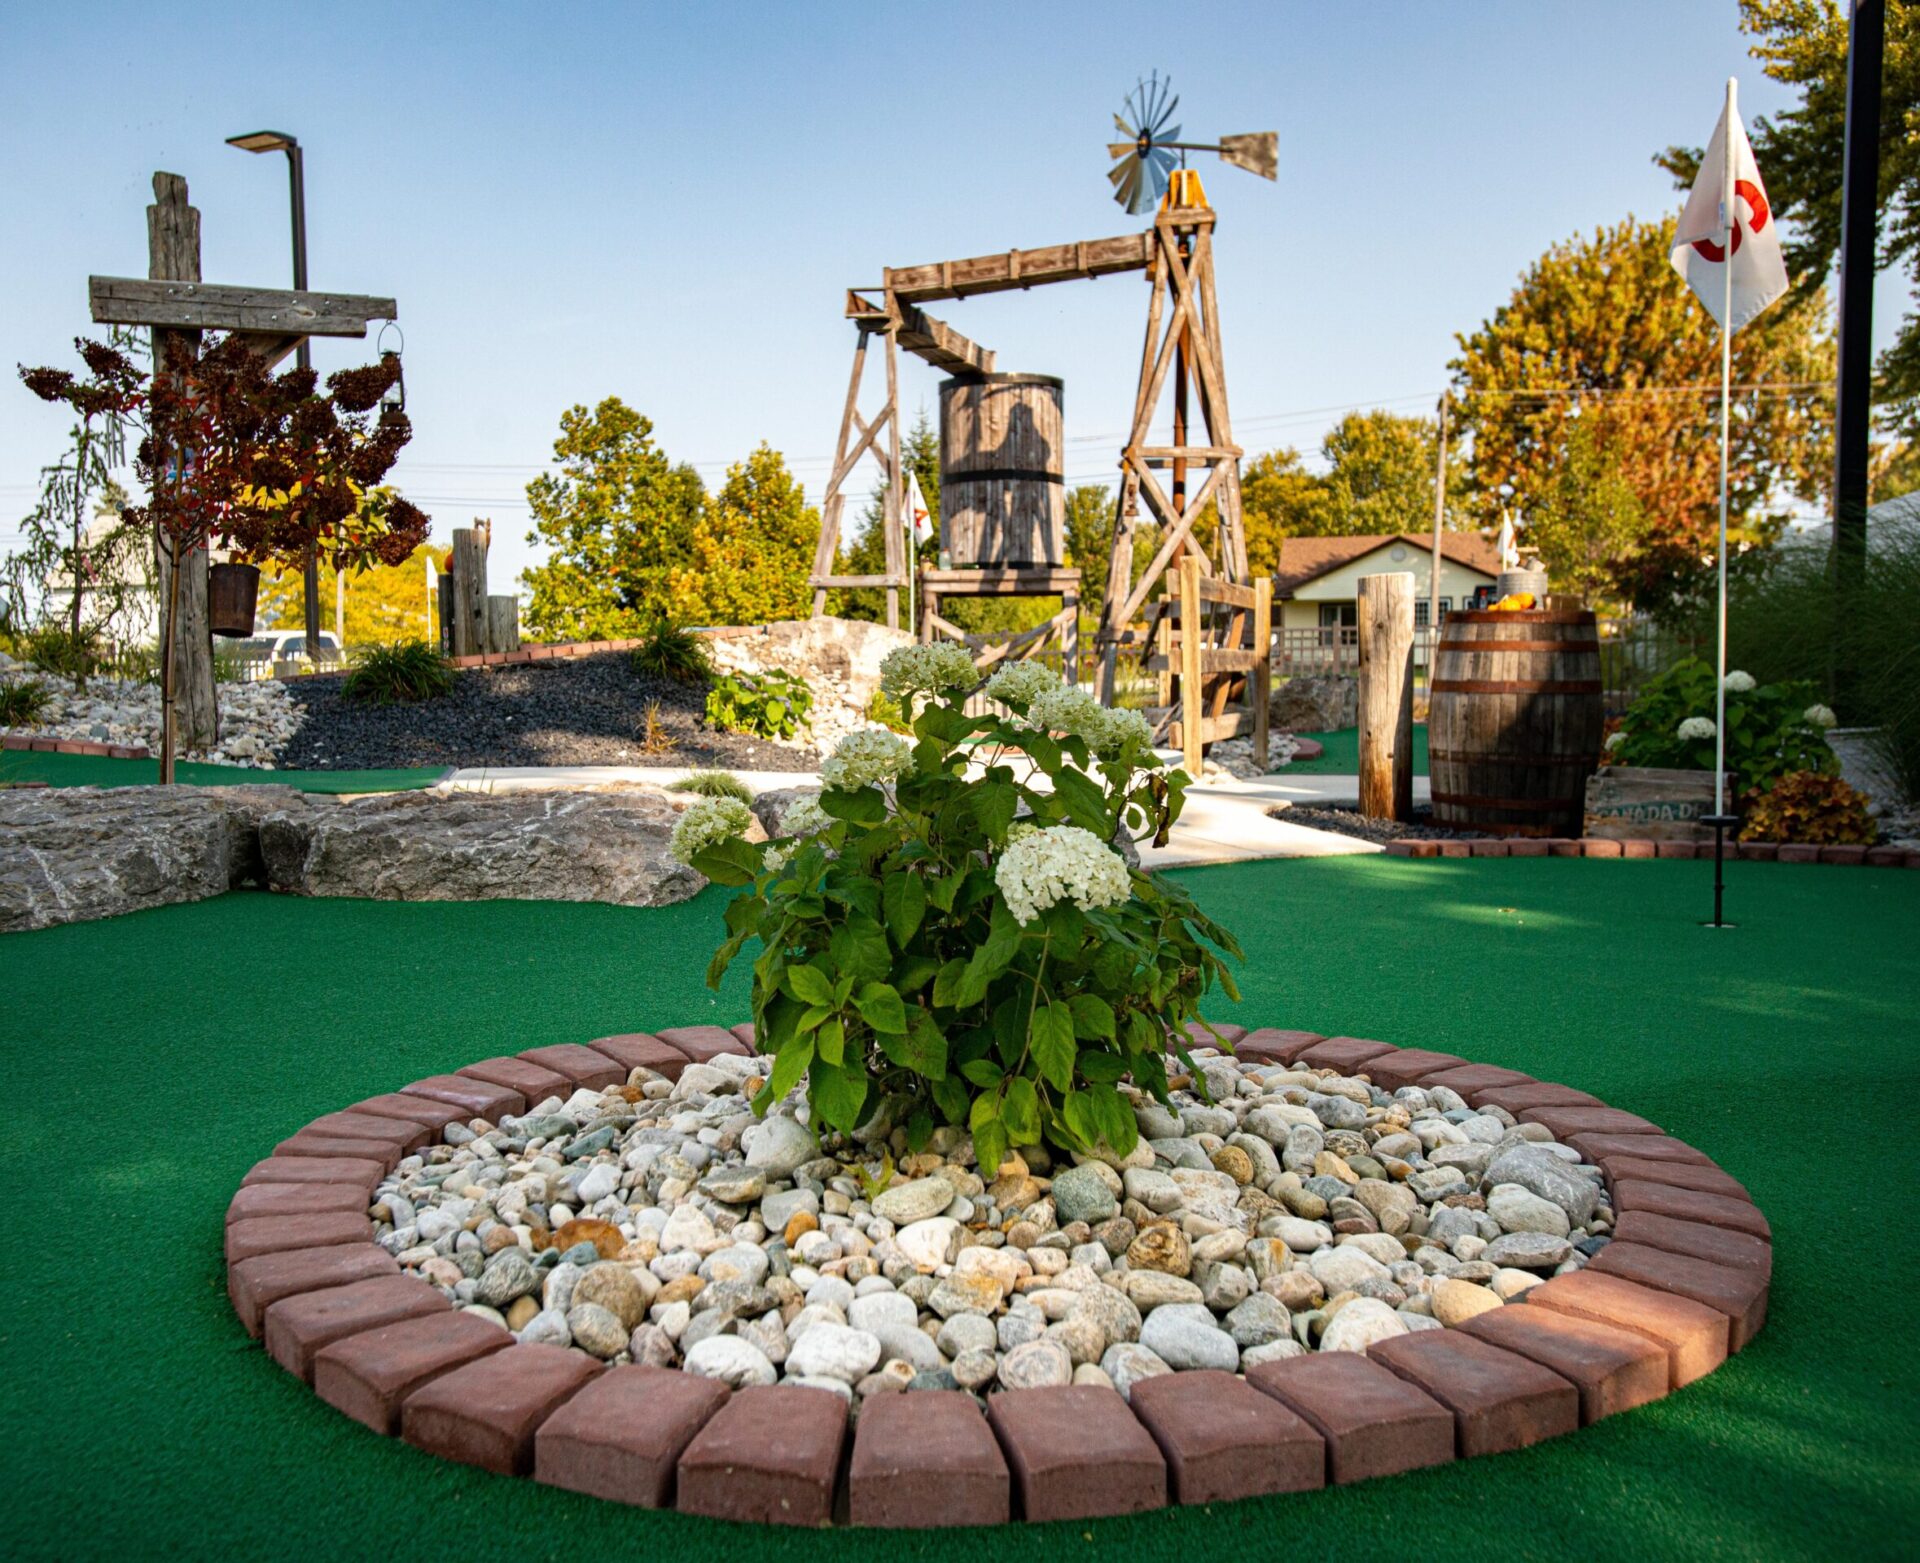 A colorful miniature golf course featuring green artificial turf, decorative landscaping with rocks and flowers, a windmill, wooden structures, and a sunny blue sky.